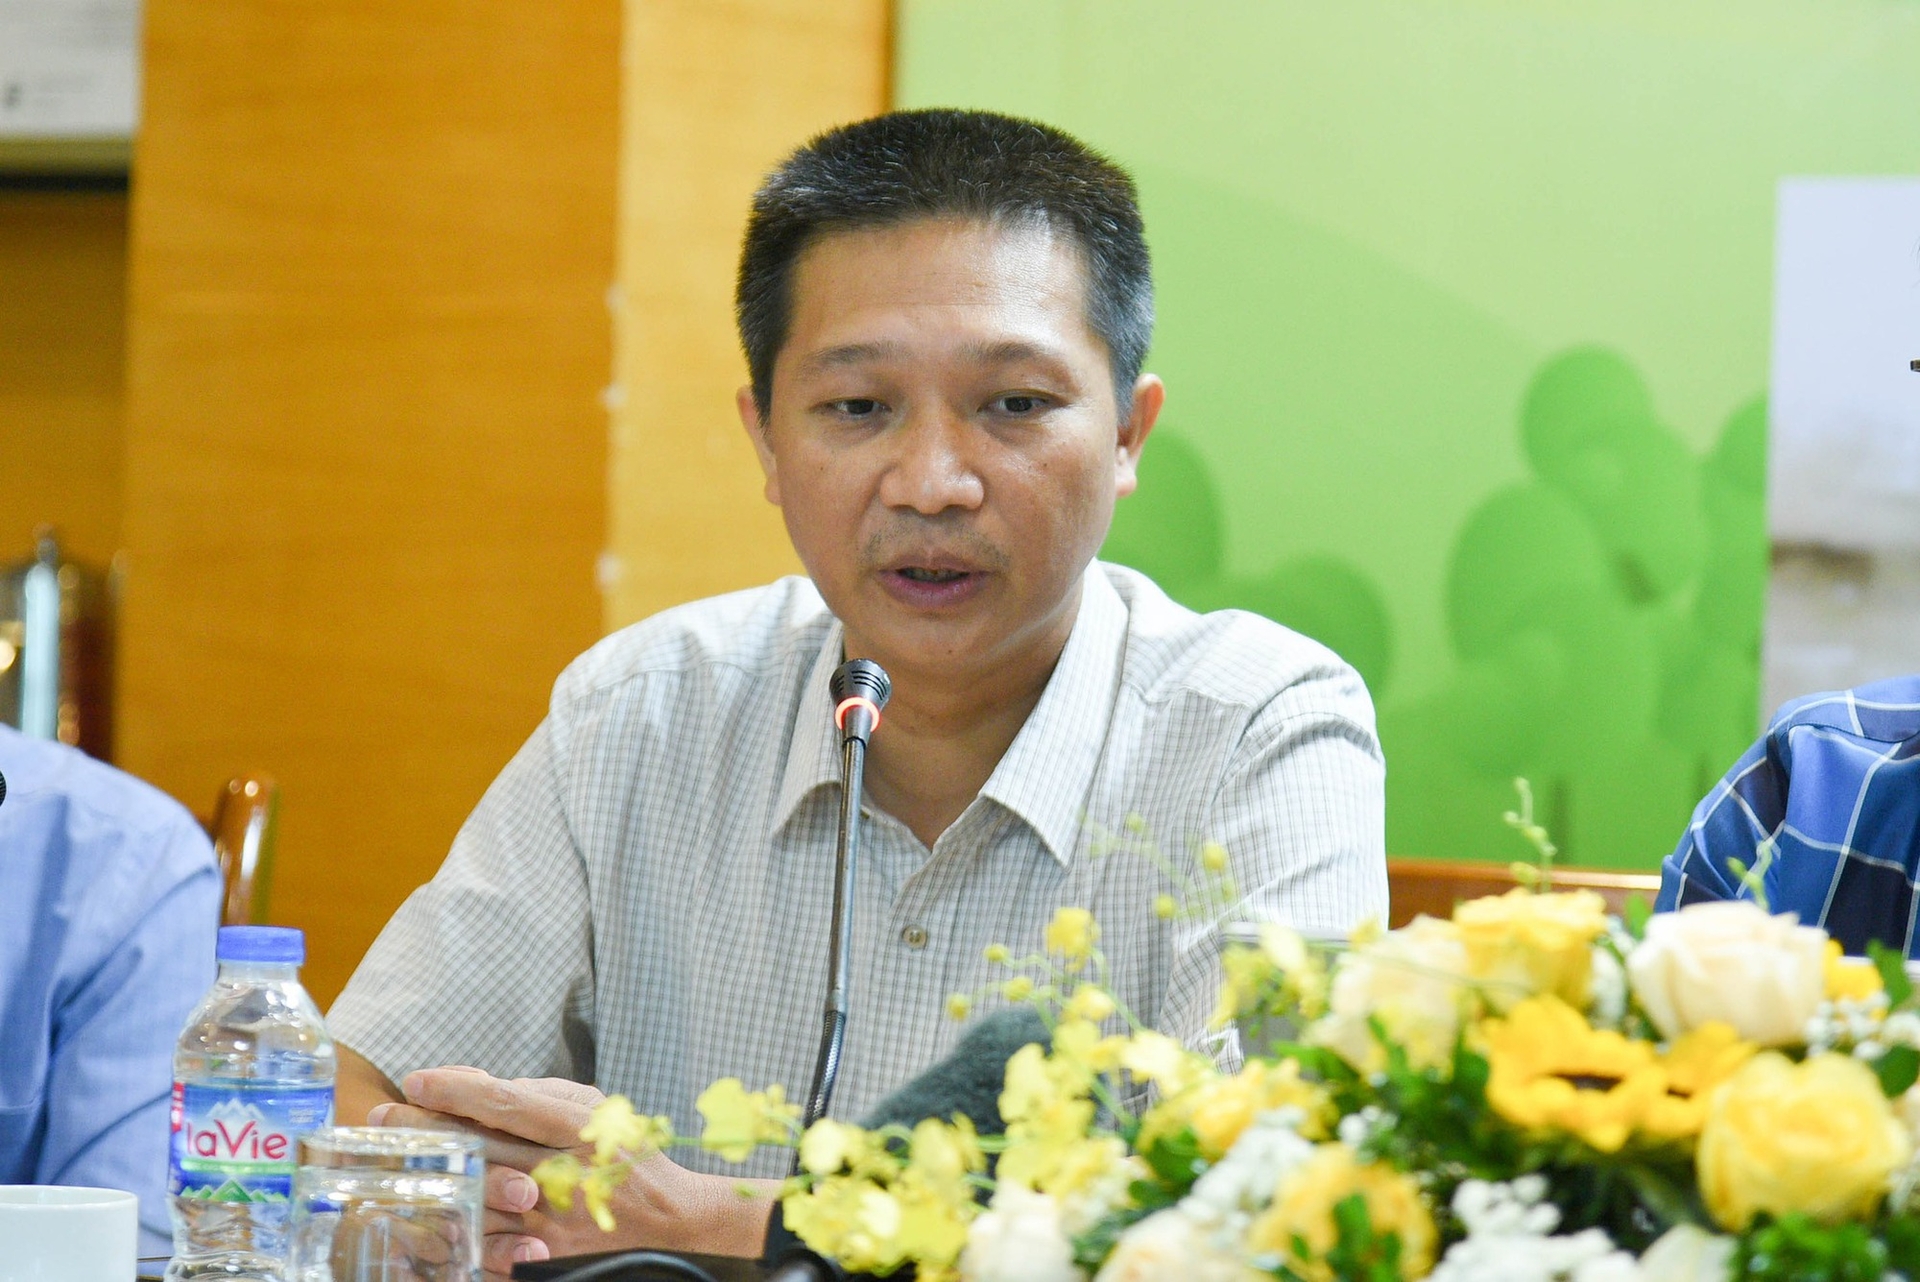 At the seminar, Nguyen Quang Hieu, Director of External Relations, De Heus Vietnam Co., Ltd, emphasized the challenges Vietnam's livestock industry has to face with the two biggest risks being price and disease. Photo: TQ.